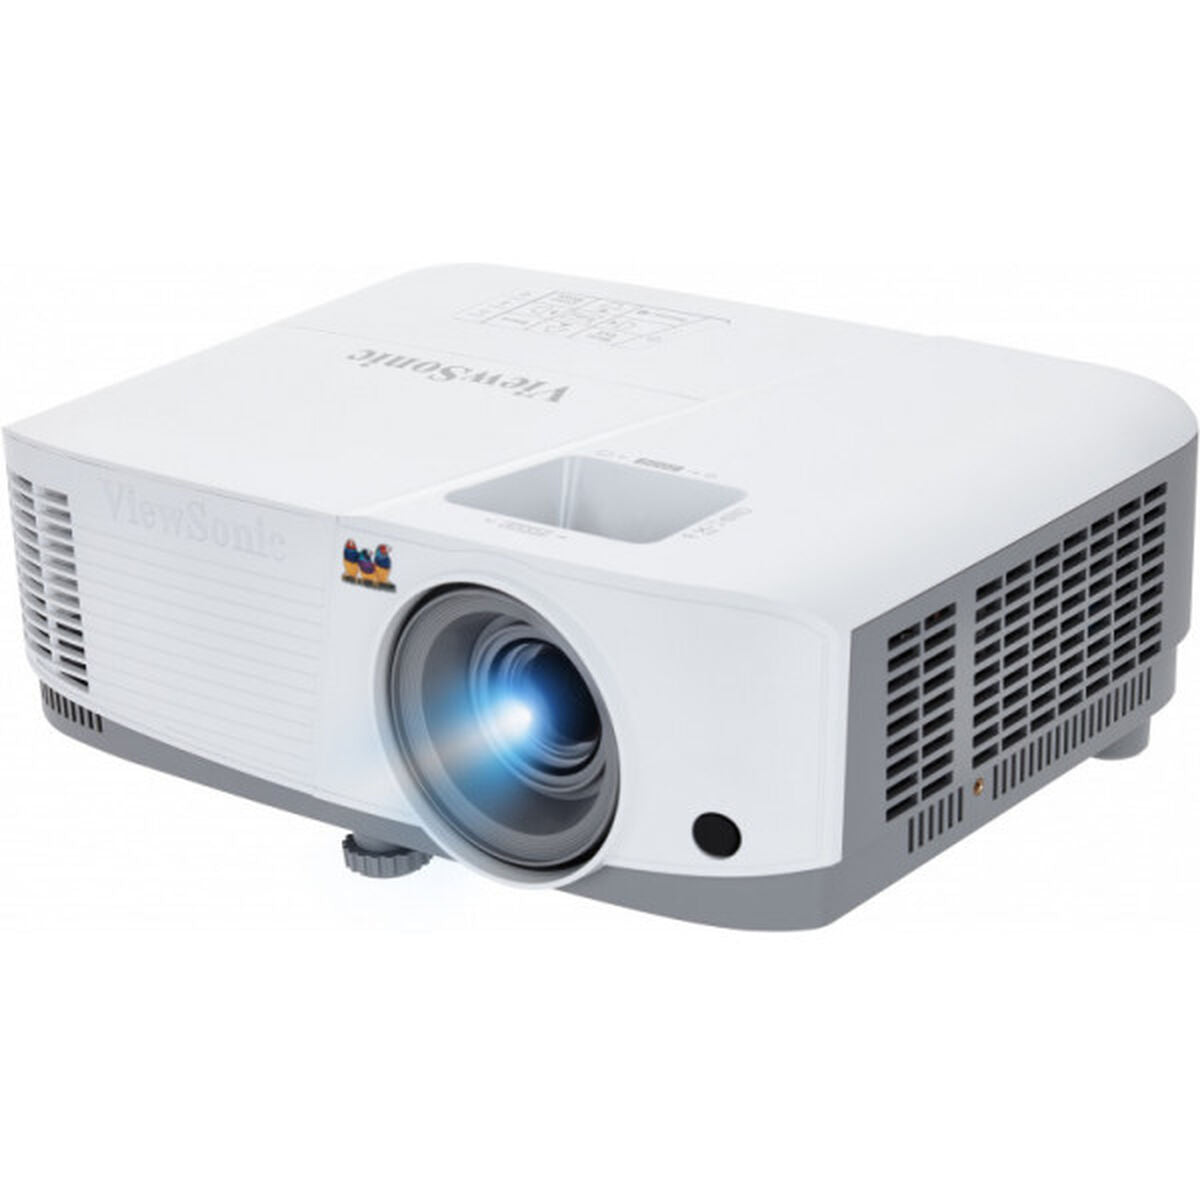 Projector ViewSonic PG707W WXGA 4000 Lm, ViewSonic, Electronics, TV, Video and home cinema, projector-viewsonic-pg707w-wxga-4000-lm, Brand_ViewSonic, category-reference-2609, category-reference-2642, category-reference-2947, category-reference-t-18805, category-reference-t-19653, cinema and television, computers / peripherals, Condition_NEW, entertainment, office, Price_600 - 700, RiotNook